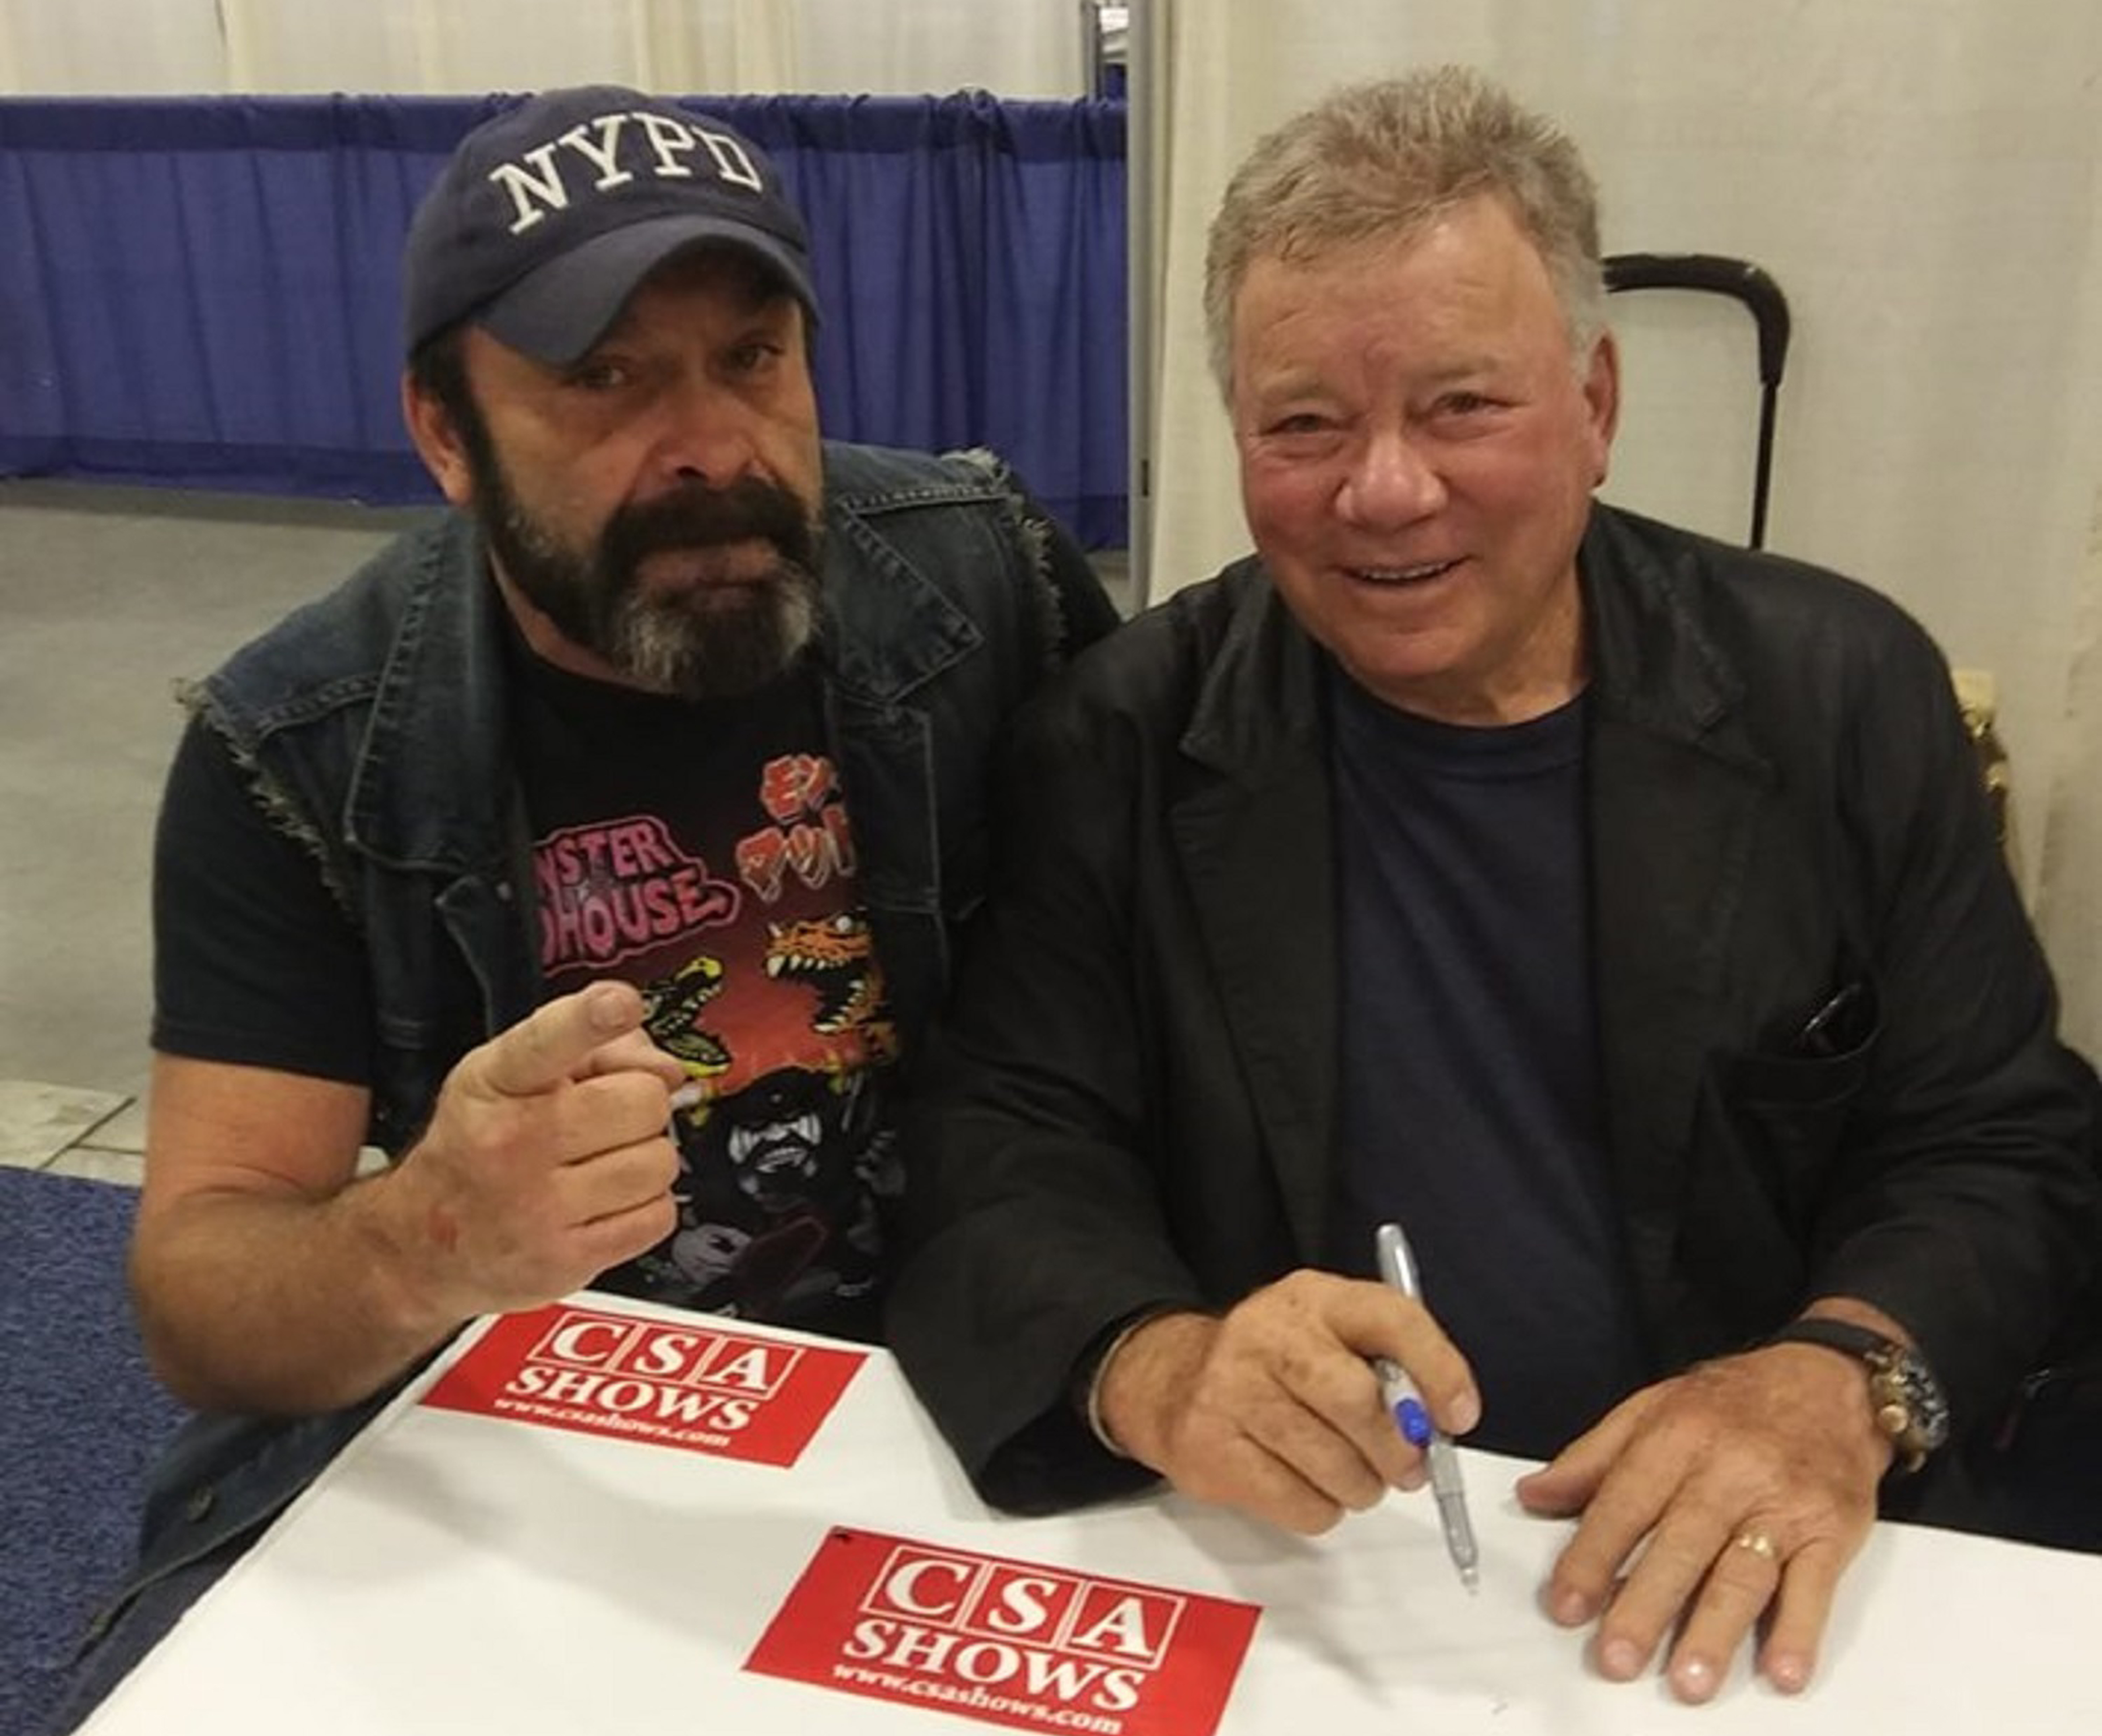 shatner and I